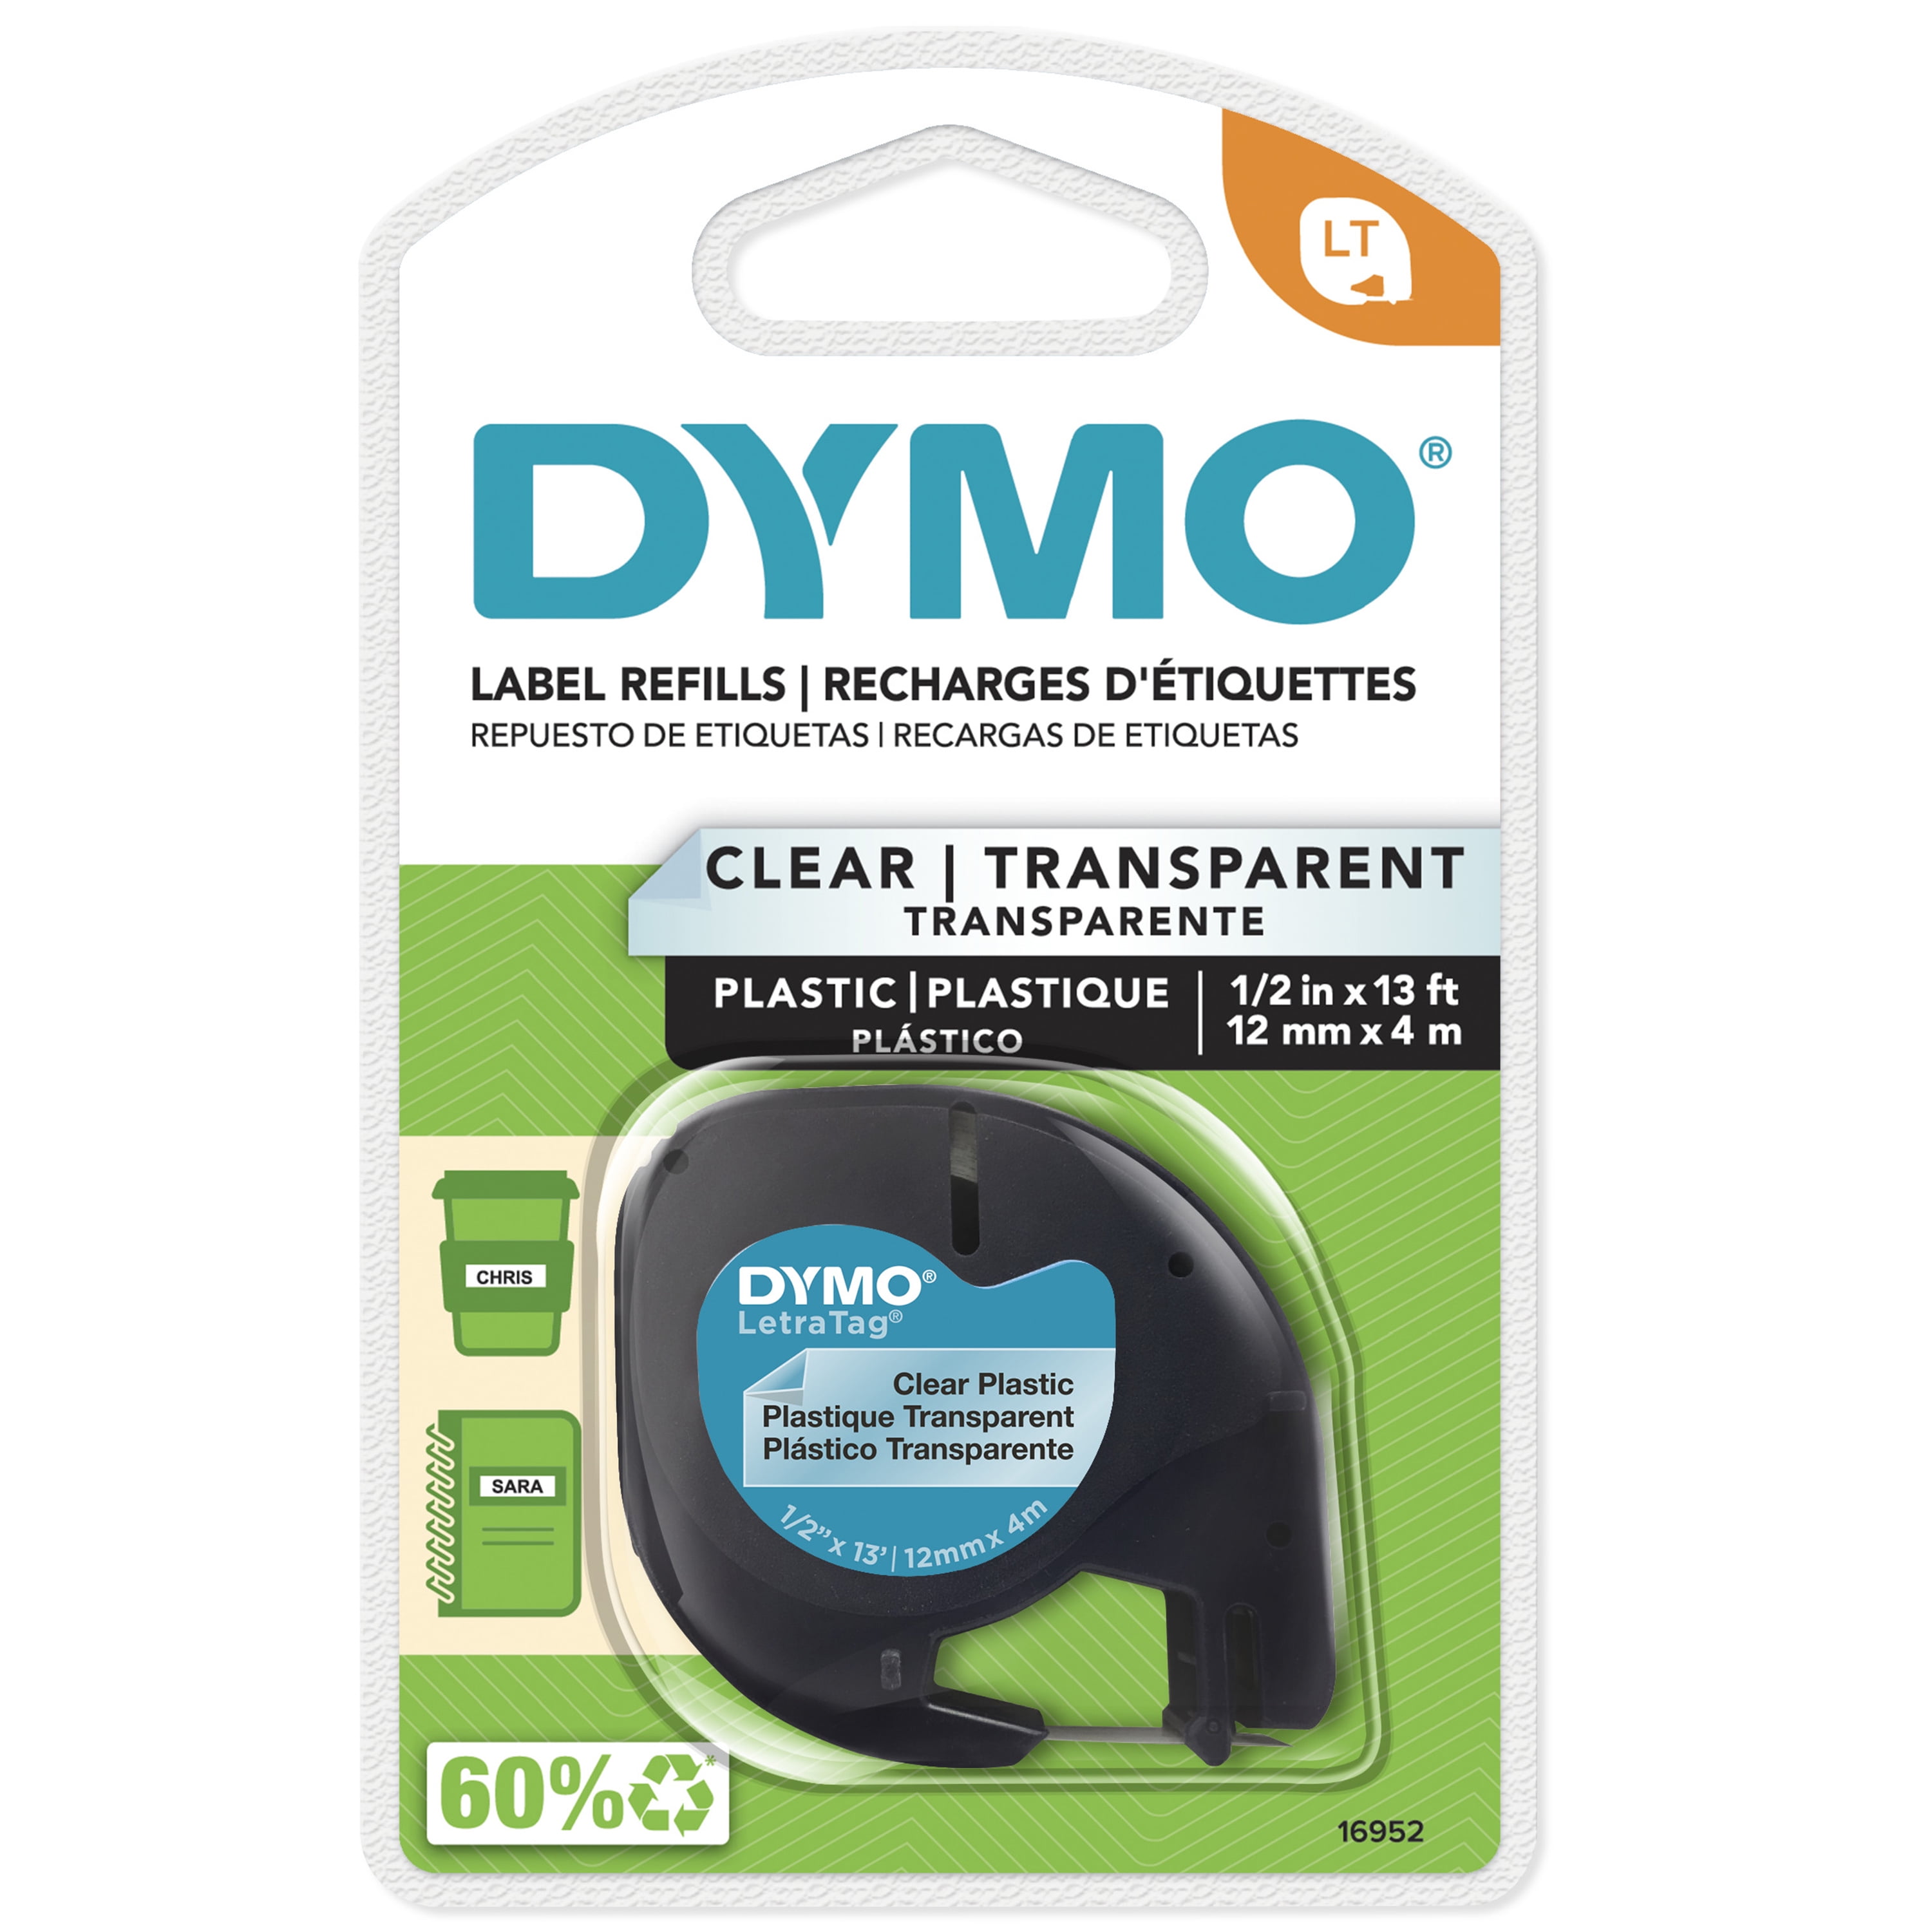 Plastic Black on Clear 12 mm x4 m, 1/2 inch x 13 foot Molshine Self-Adhesive LetraTag Label Tape Compatible for DYMO 2 Roll s 12267 16951 16952 12268 